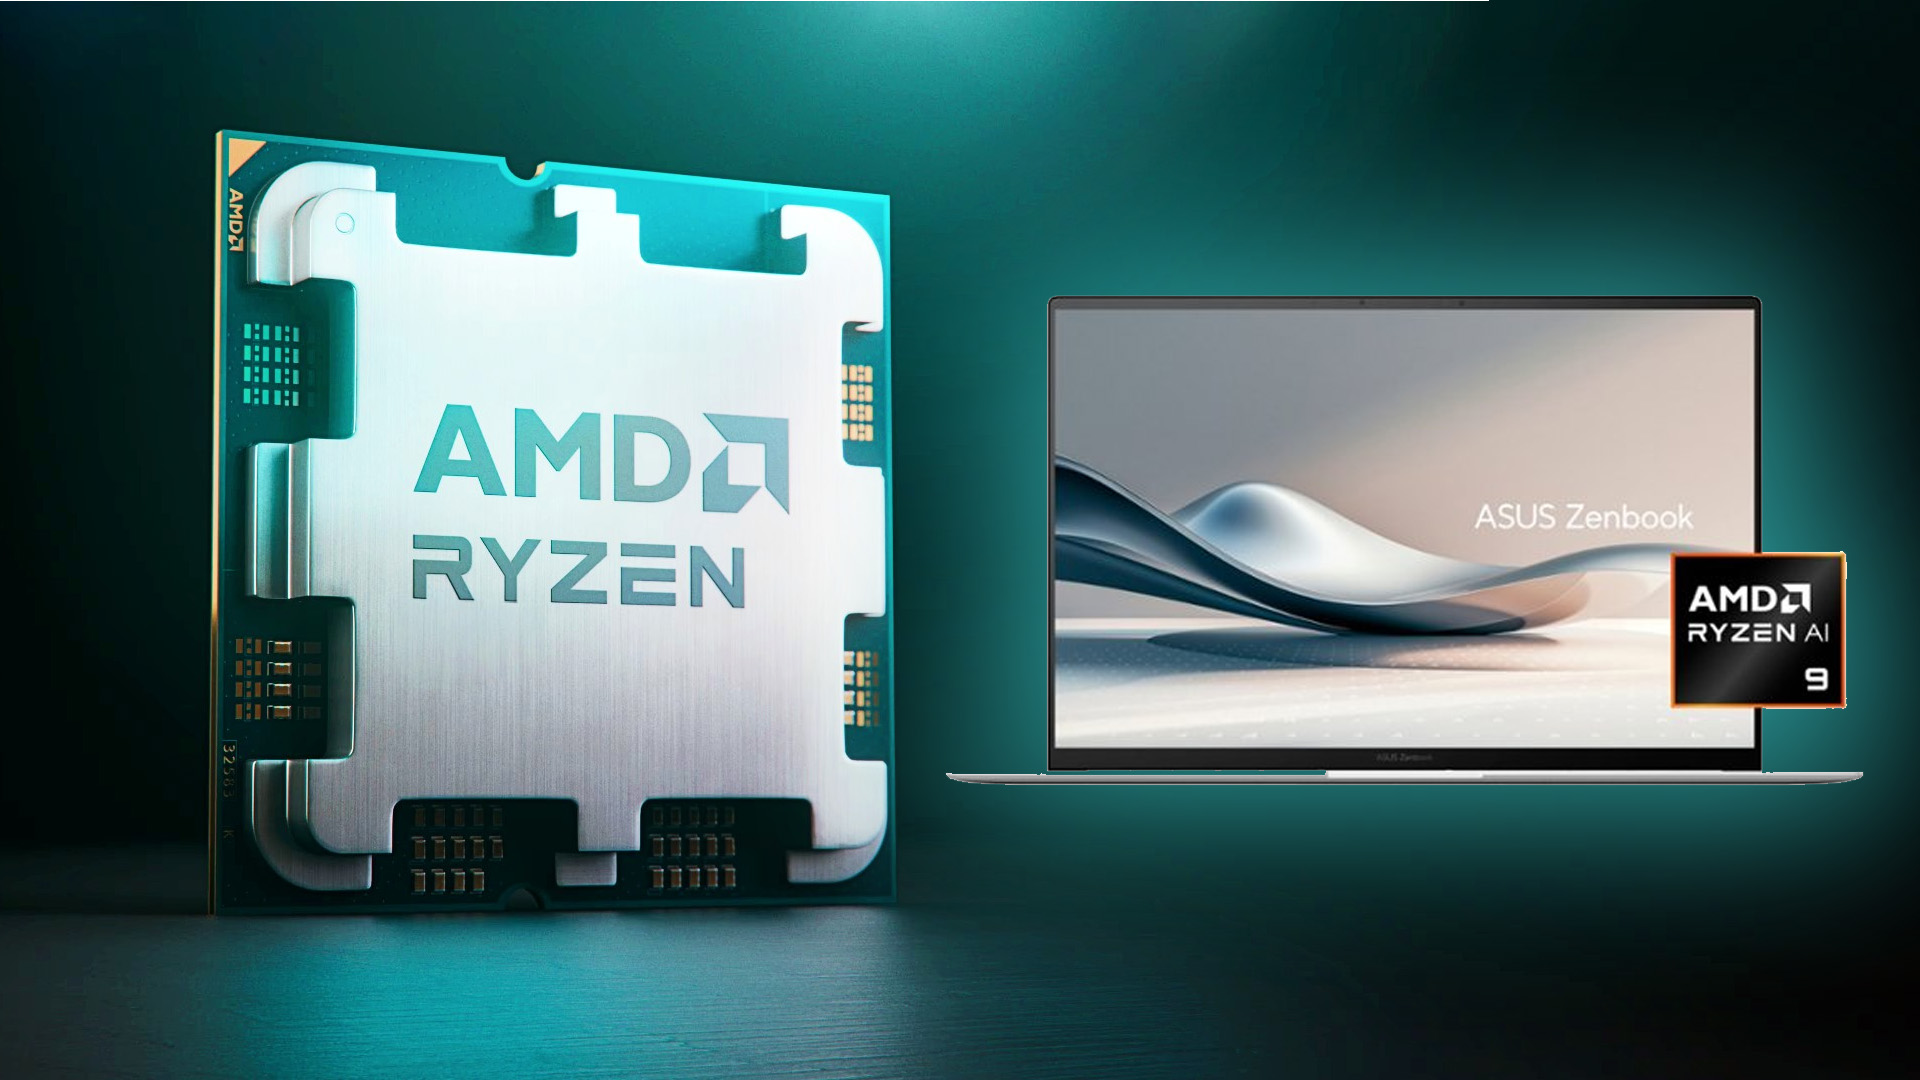 AMD's Ryzen 9000 and AI 300 CPU release dates just got leaked